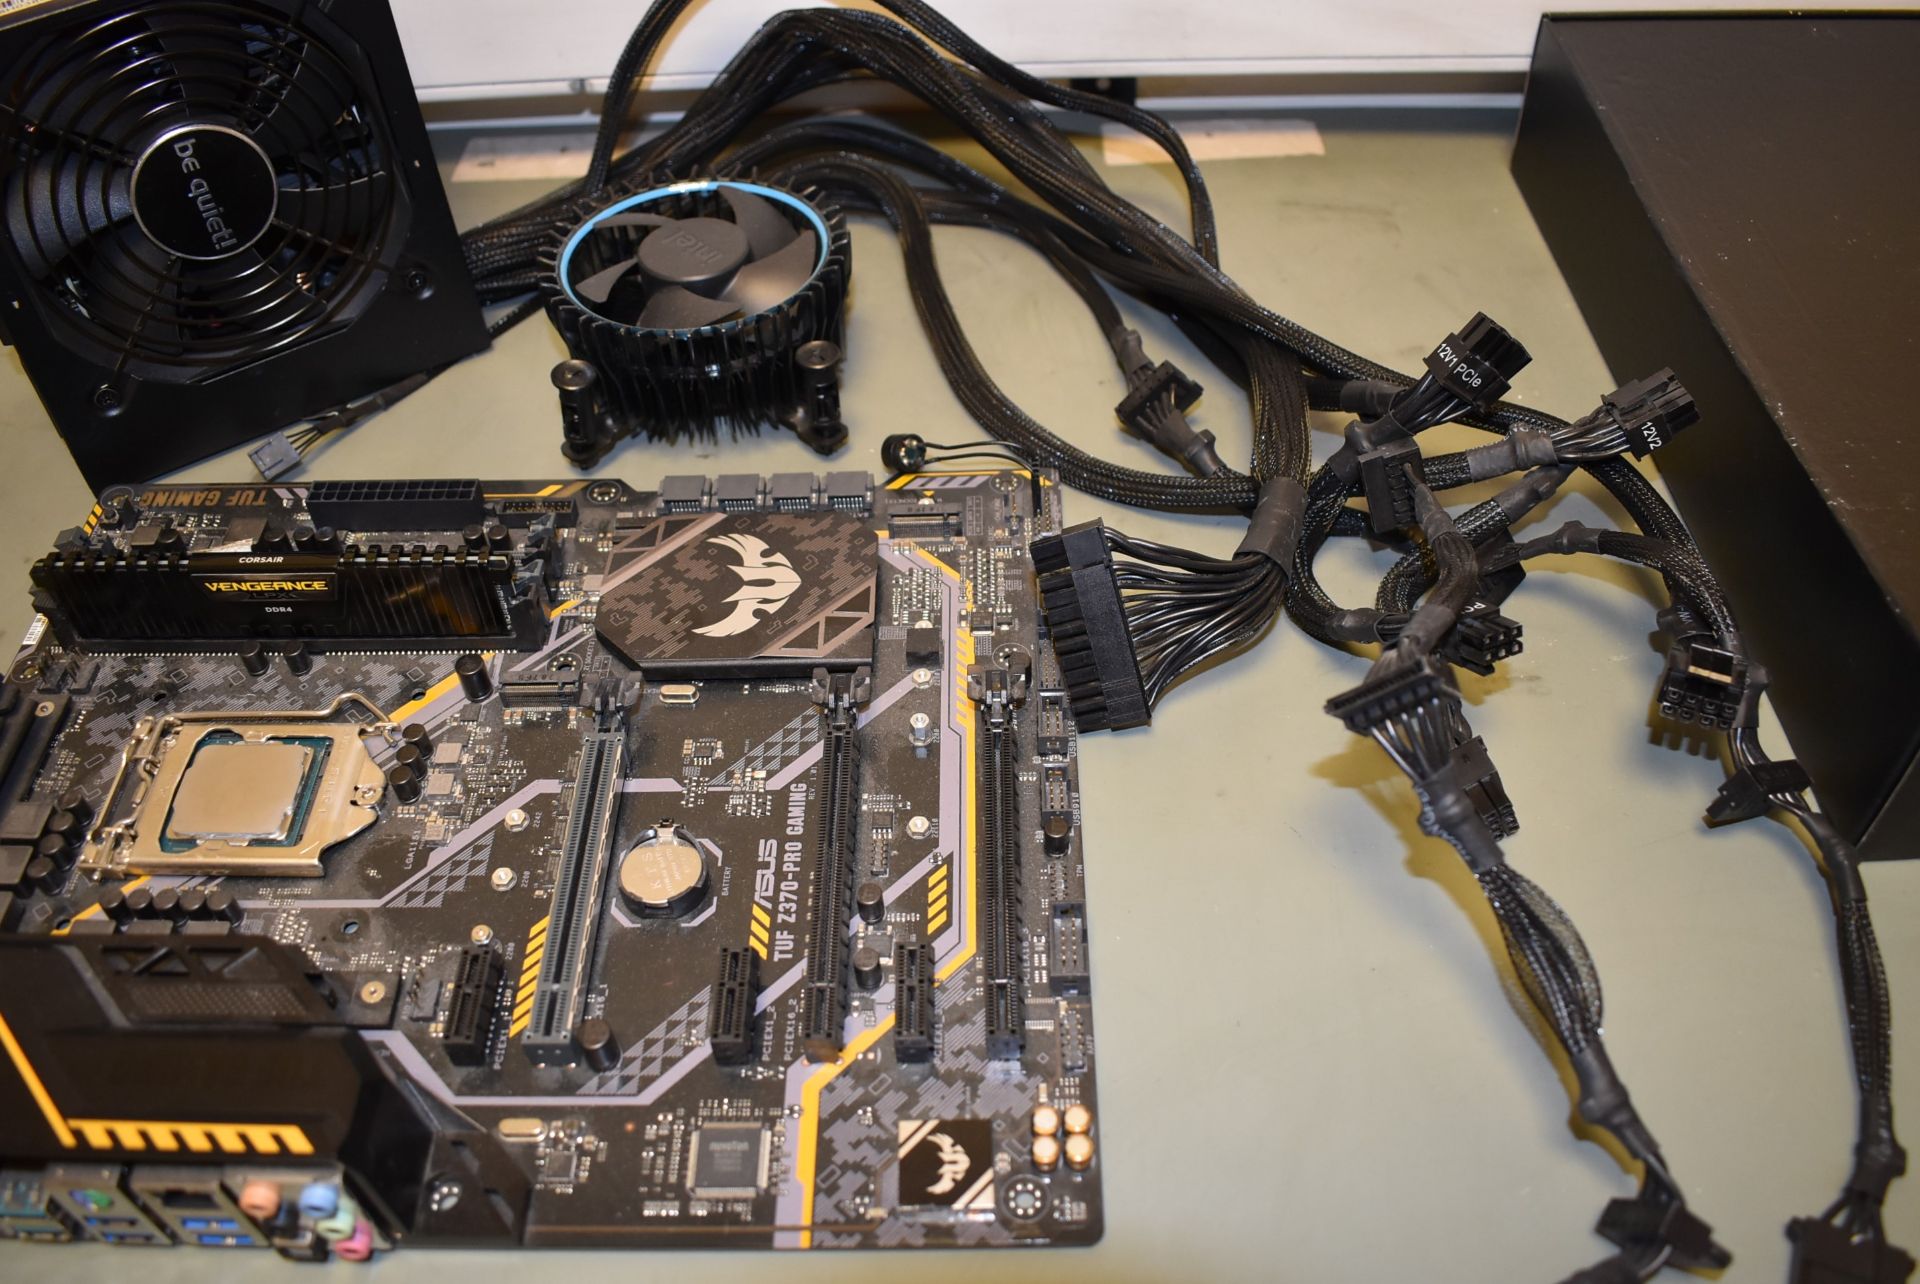 1 x Test Bench PC System Featuring an Asus TUF Z370 Gaming Intel Motherboard, Intel i3-9100 - Image 3 of 6